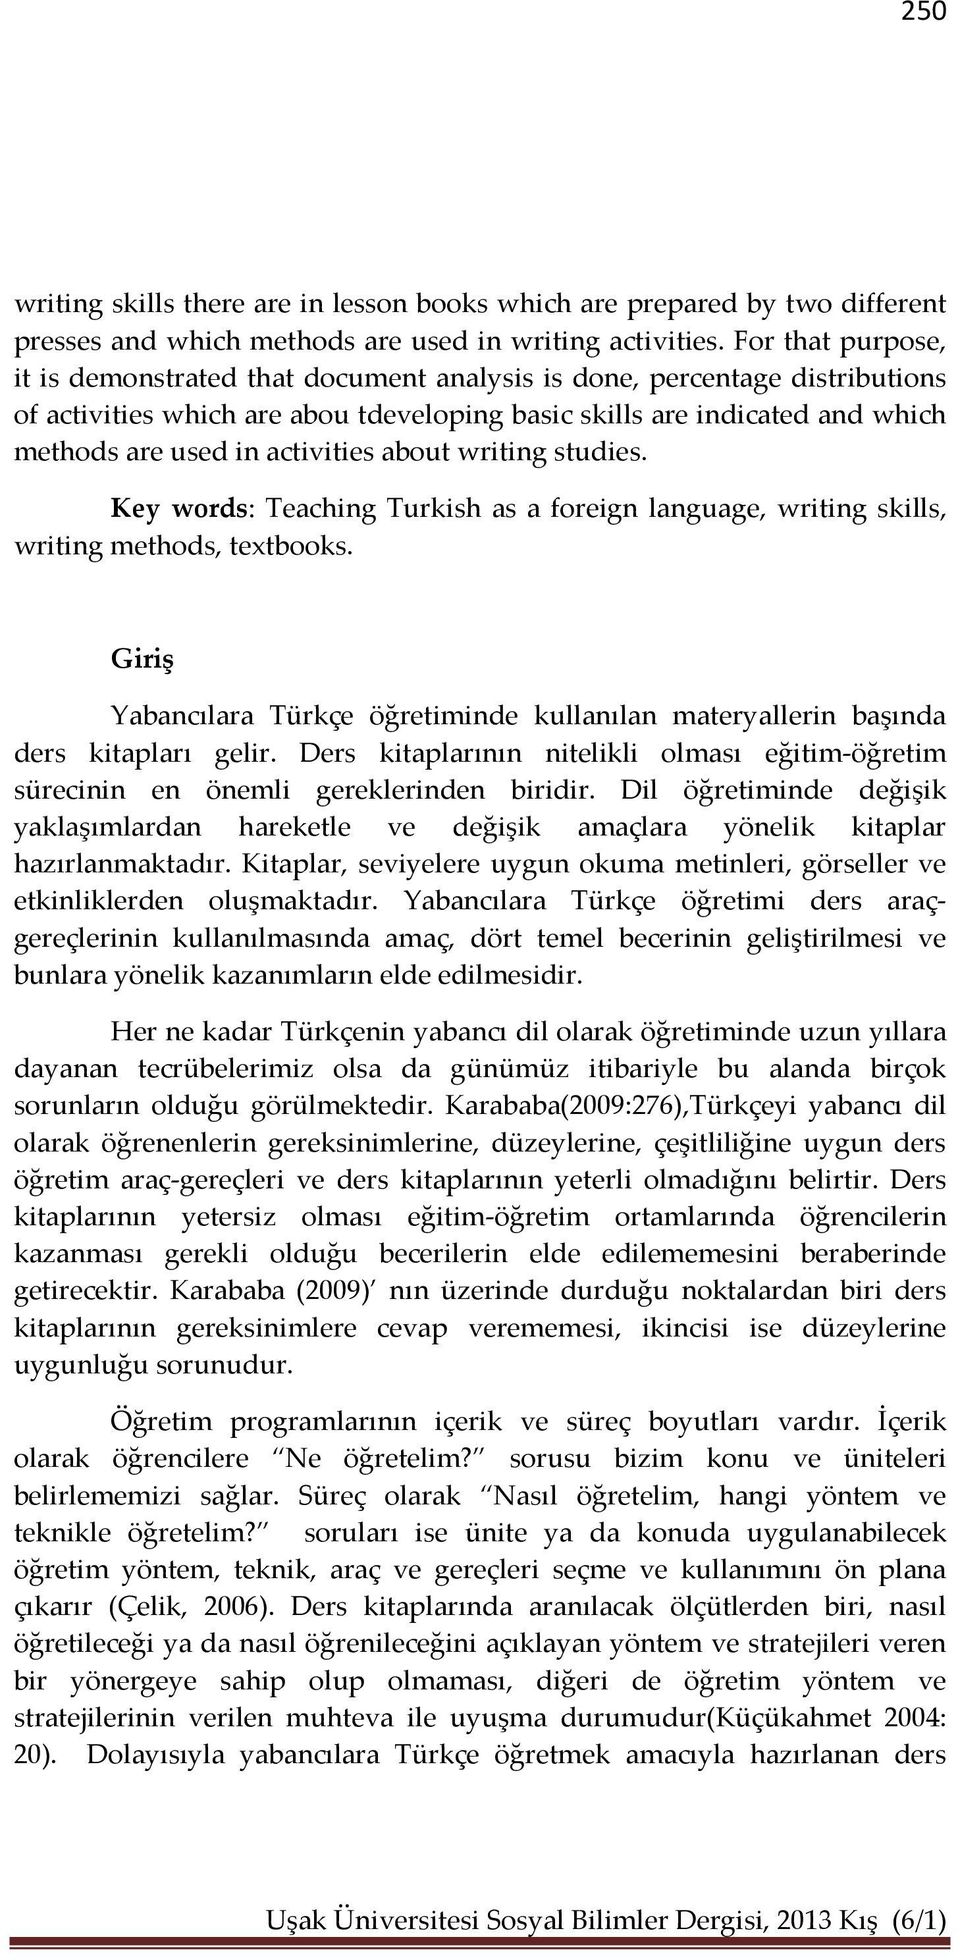 activities about writing studies. Key words: Teaching Turkish as a foreign language, writing skills, writing methods, textbooks.